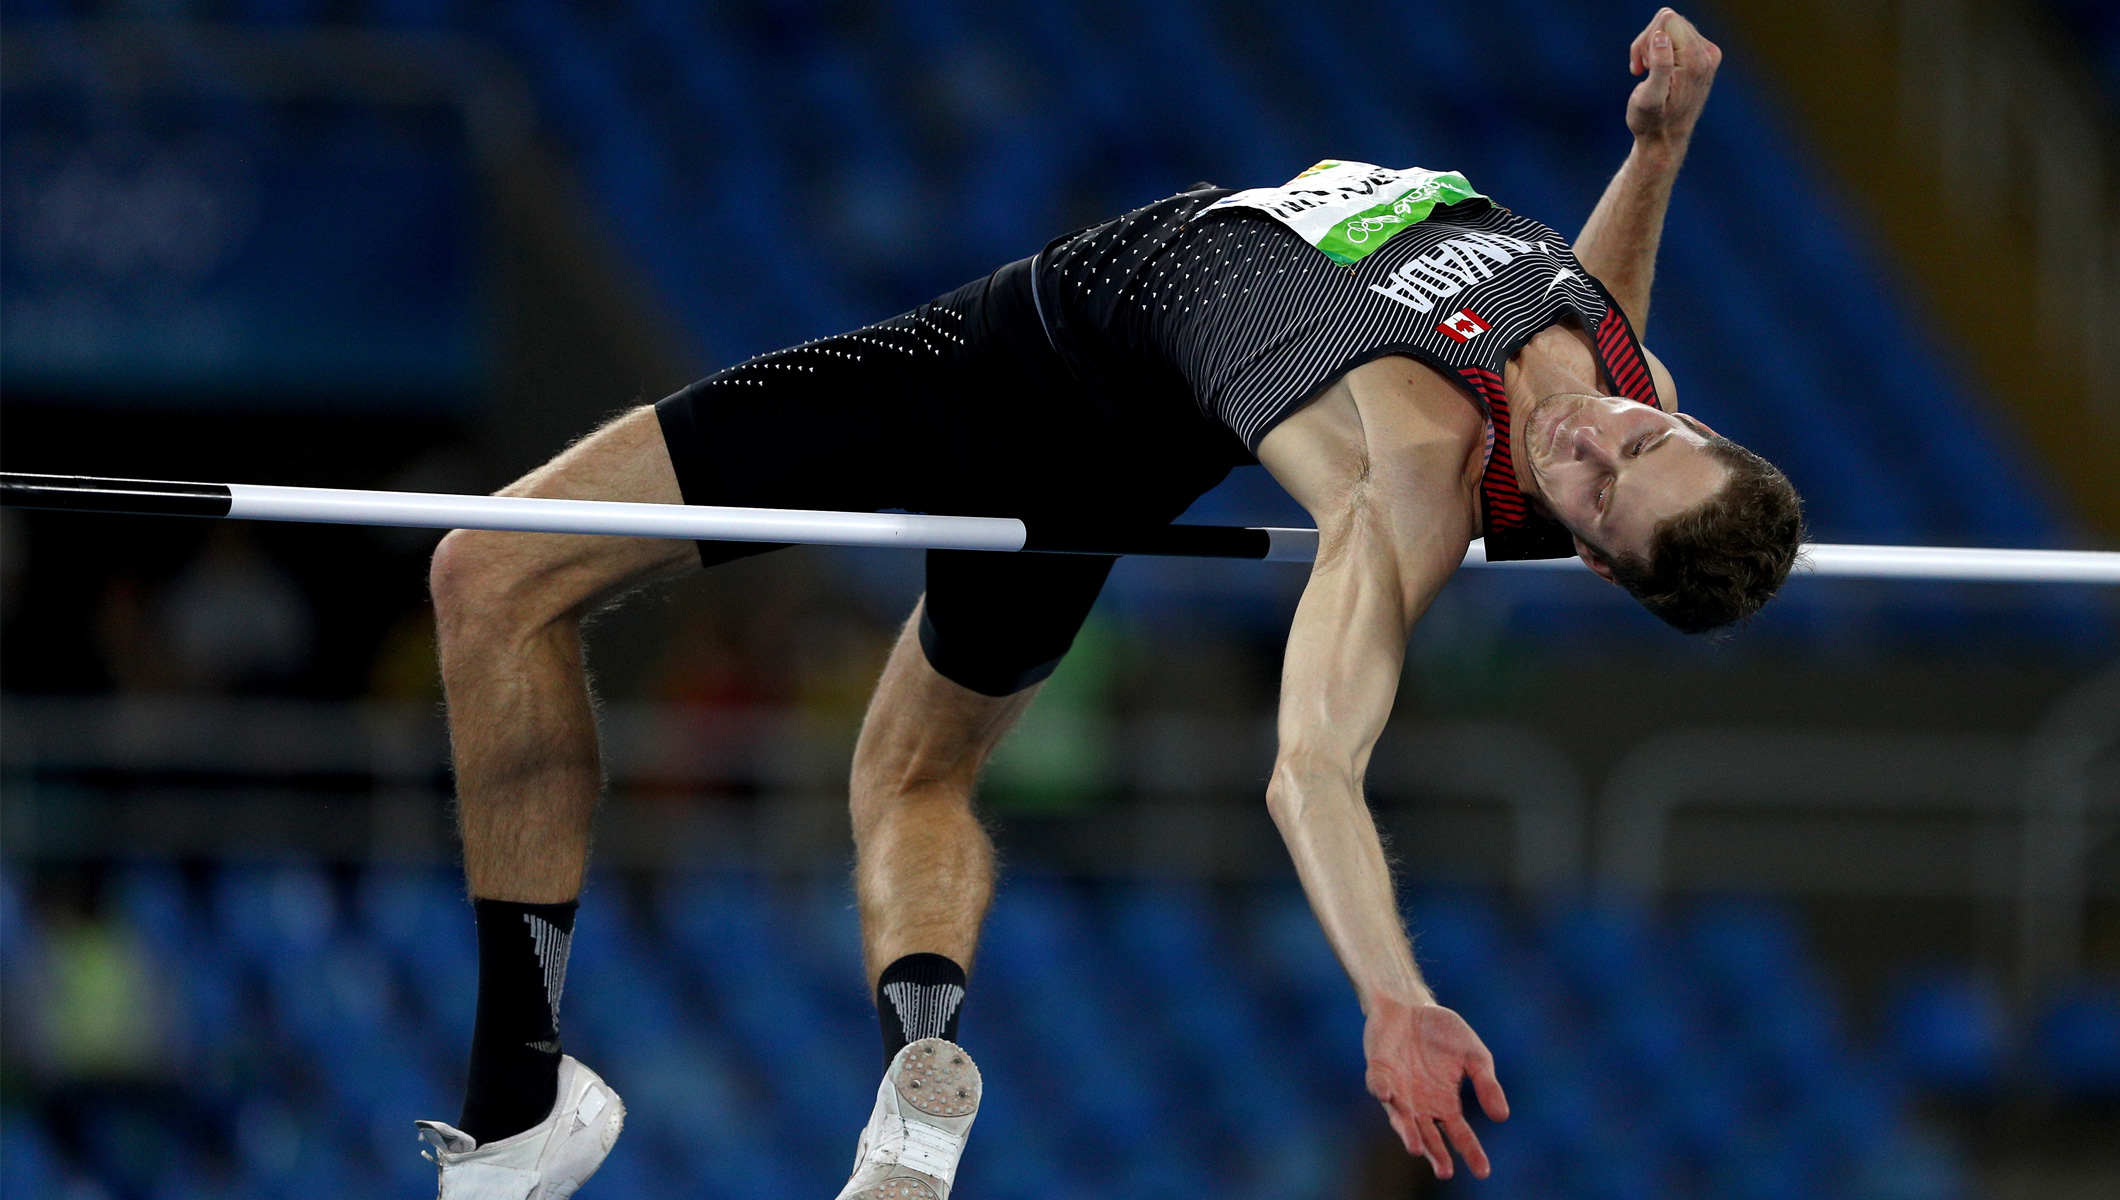 Drouin leaps to men's high jump gold - Olympic News